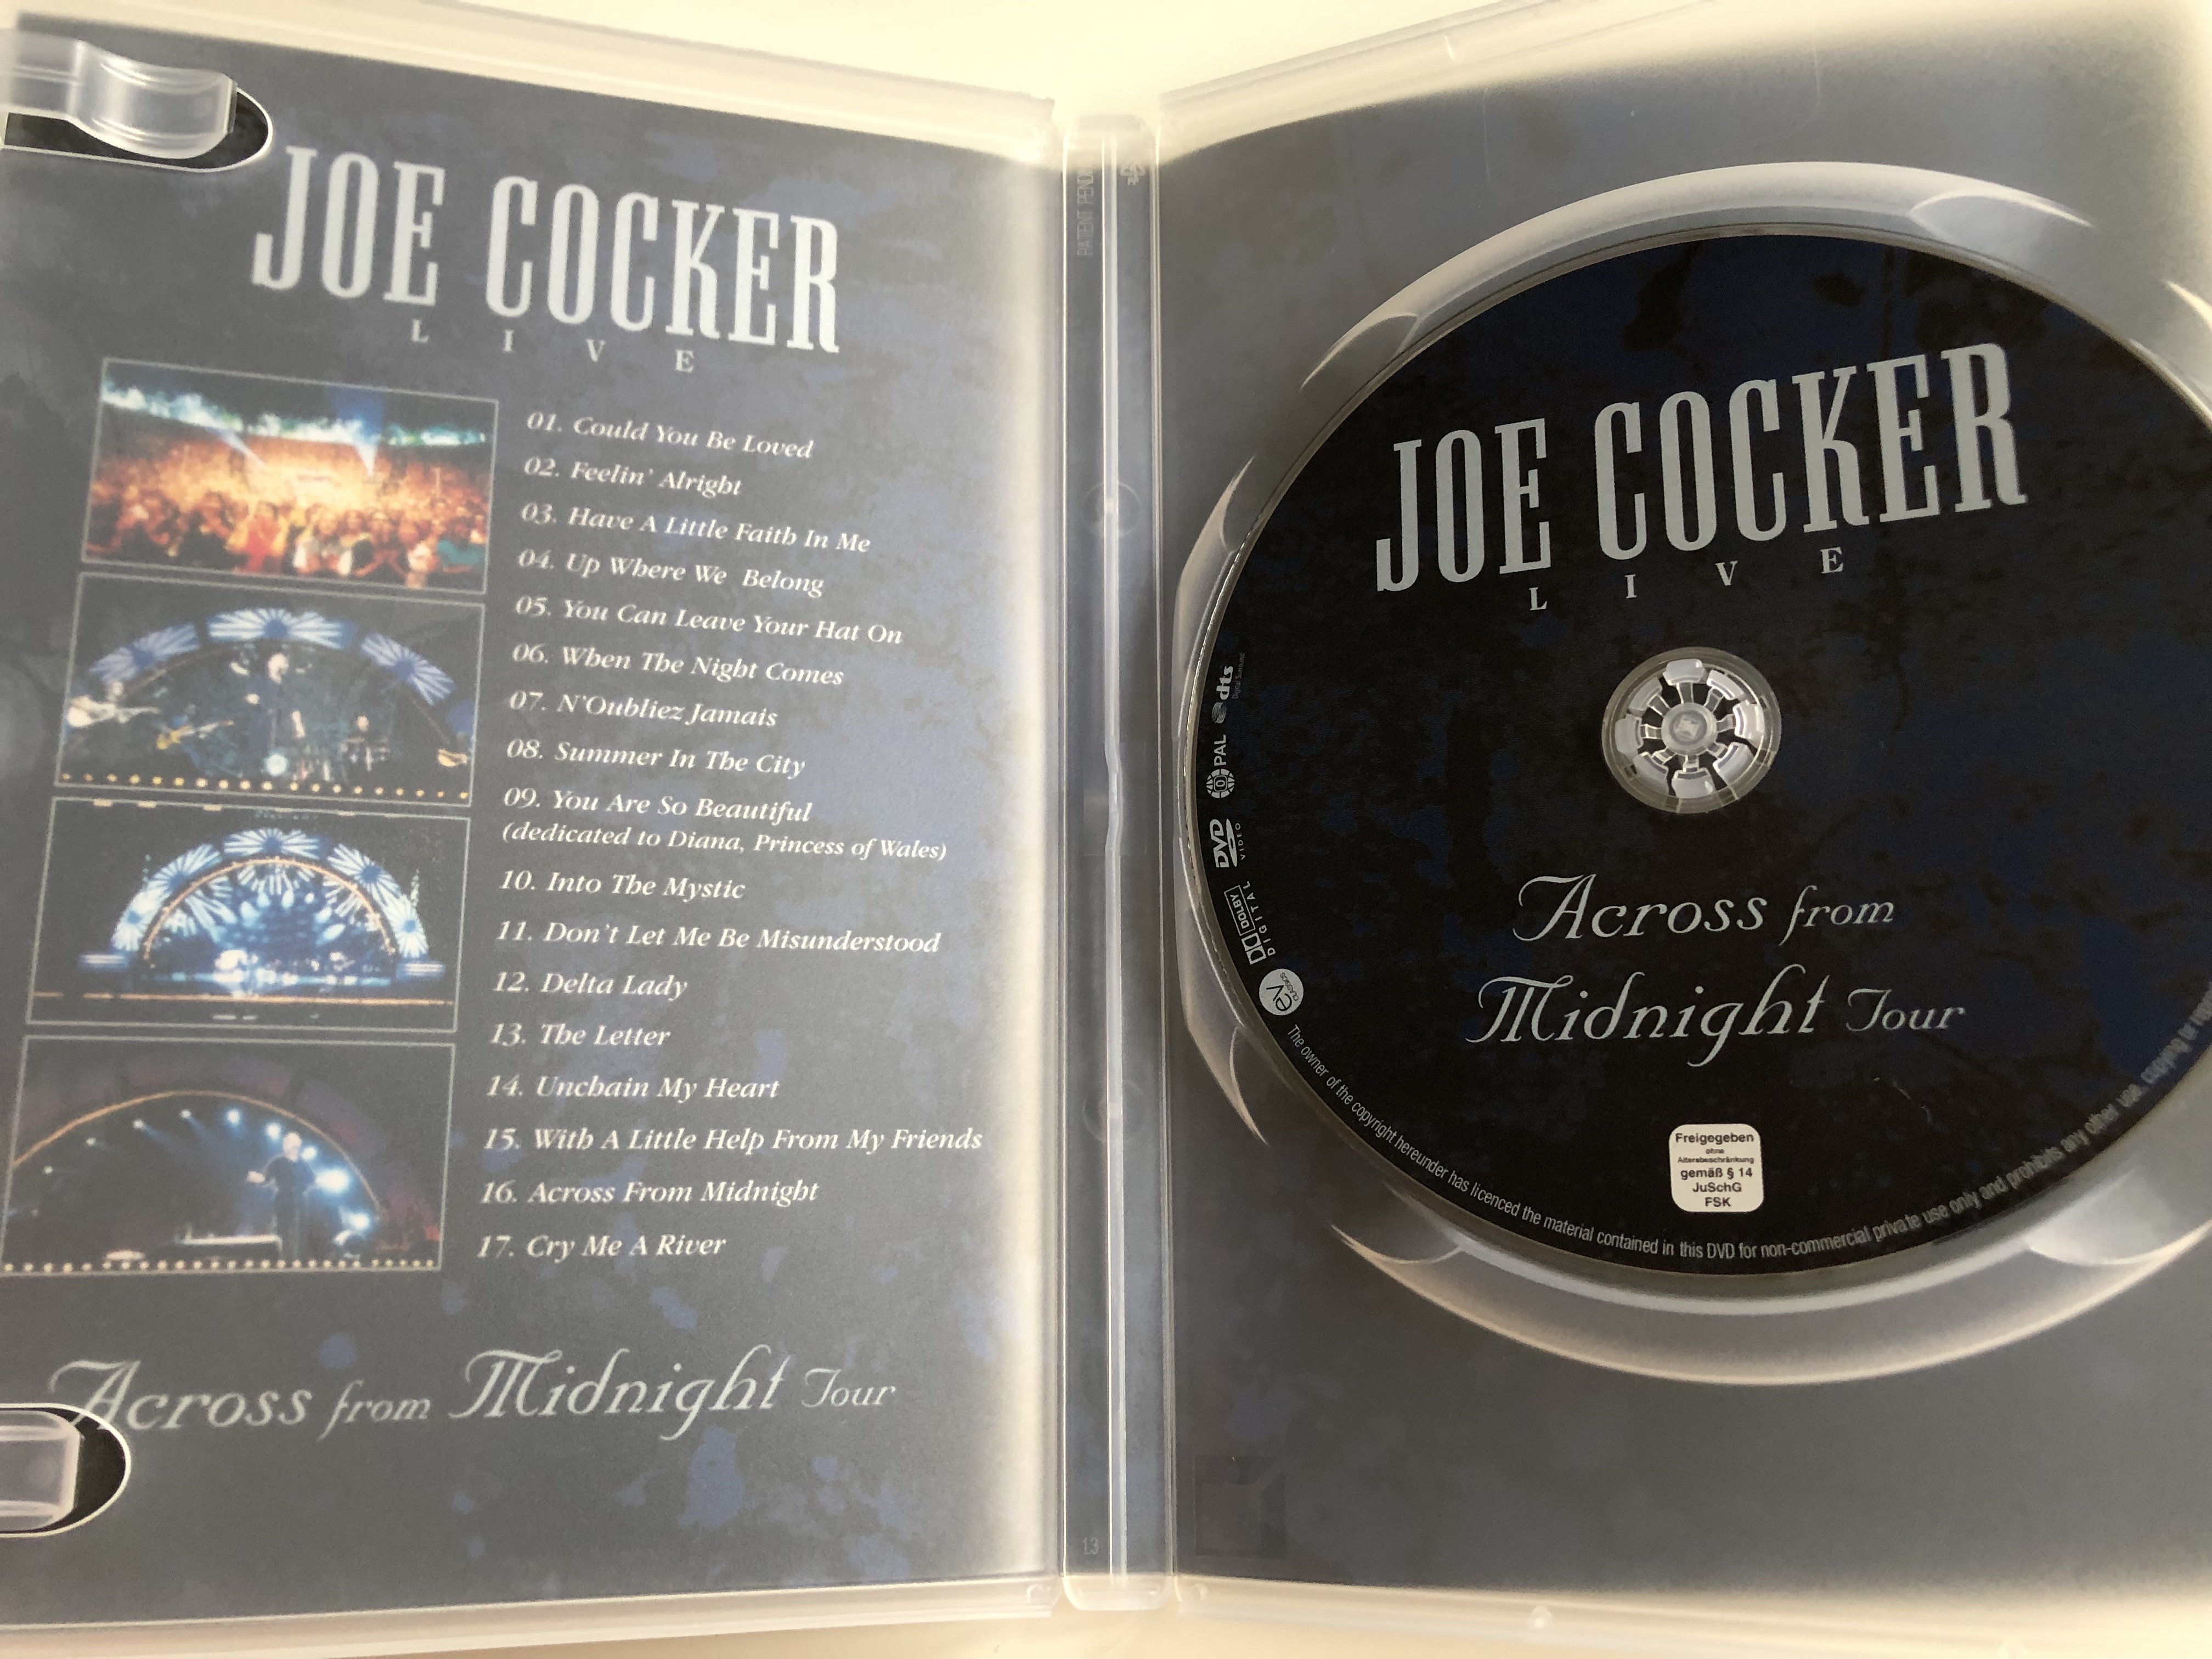 joe-cocker-live-dvd-1997-across-from-the-midnight-tour-directed-by-egbert-van-hees-could-you-be-loved-up-where-we-belong-summer-in-the-city-unchain-my-heart-ev-classics-2-.jpg